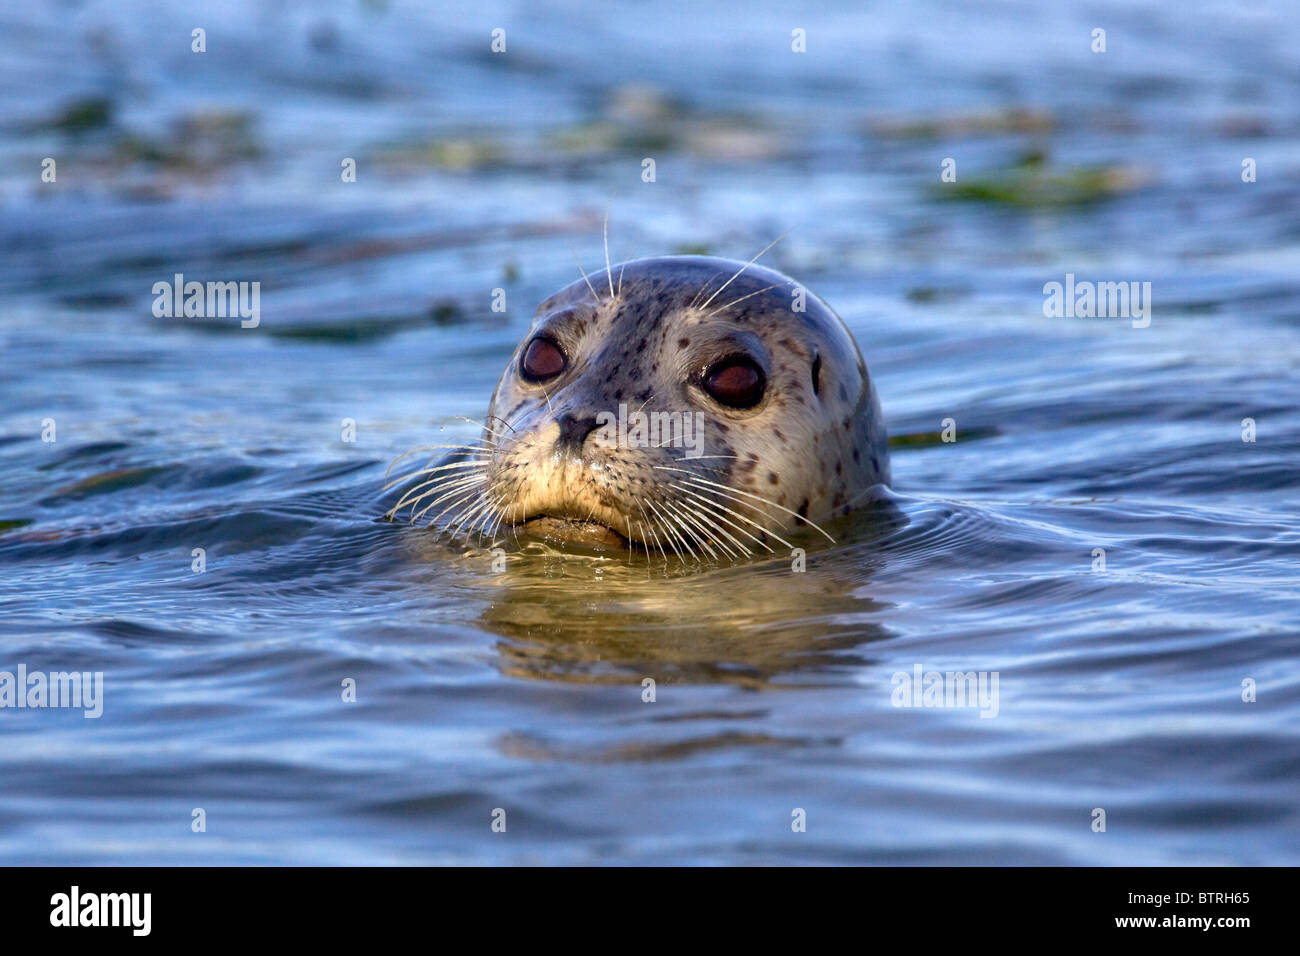 A harbor seal (Phoca vitulina) pops its head above water in Elkhorn Slough - Moss Landing, California. Stock Photo